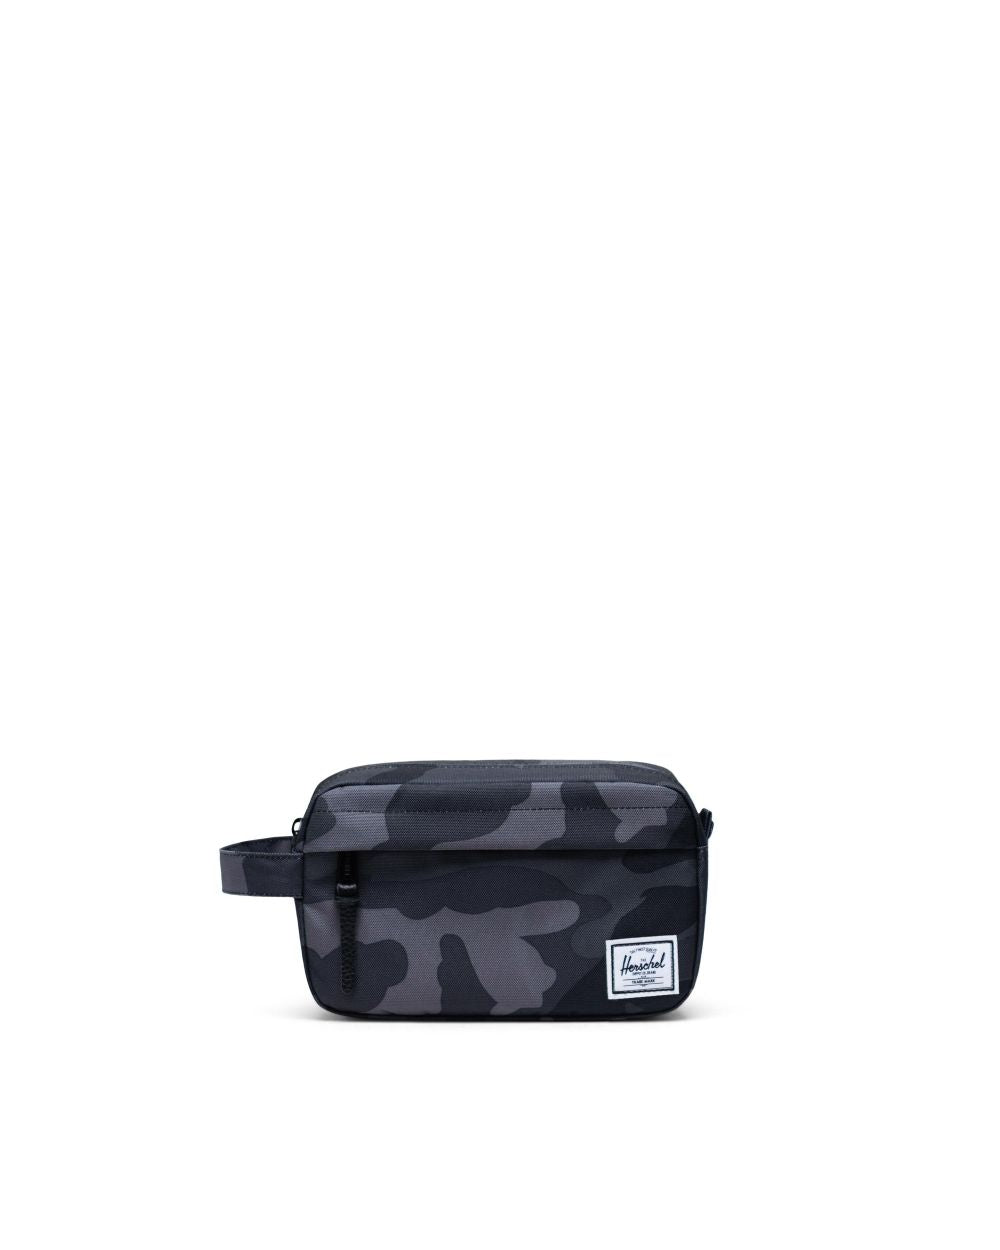 Herschel Supply Co -  Chapter Travel Kit Carry-On, Night Camo